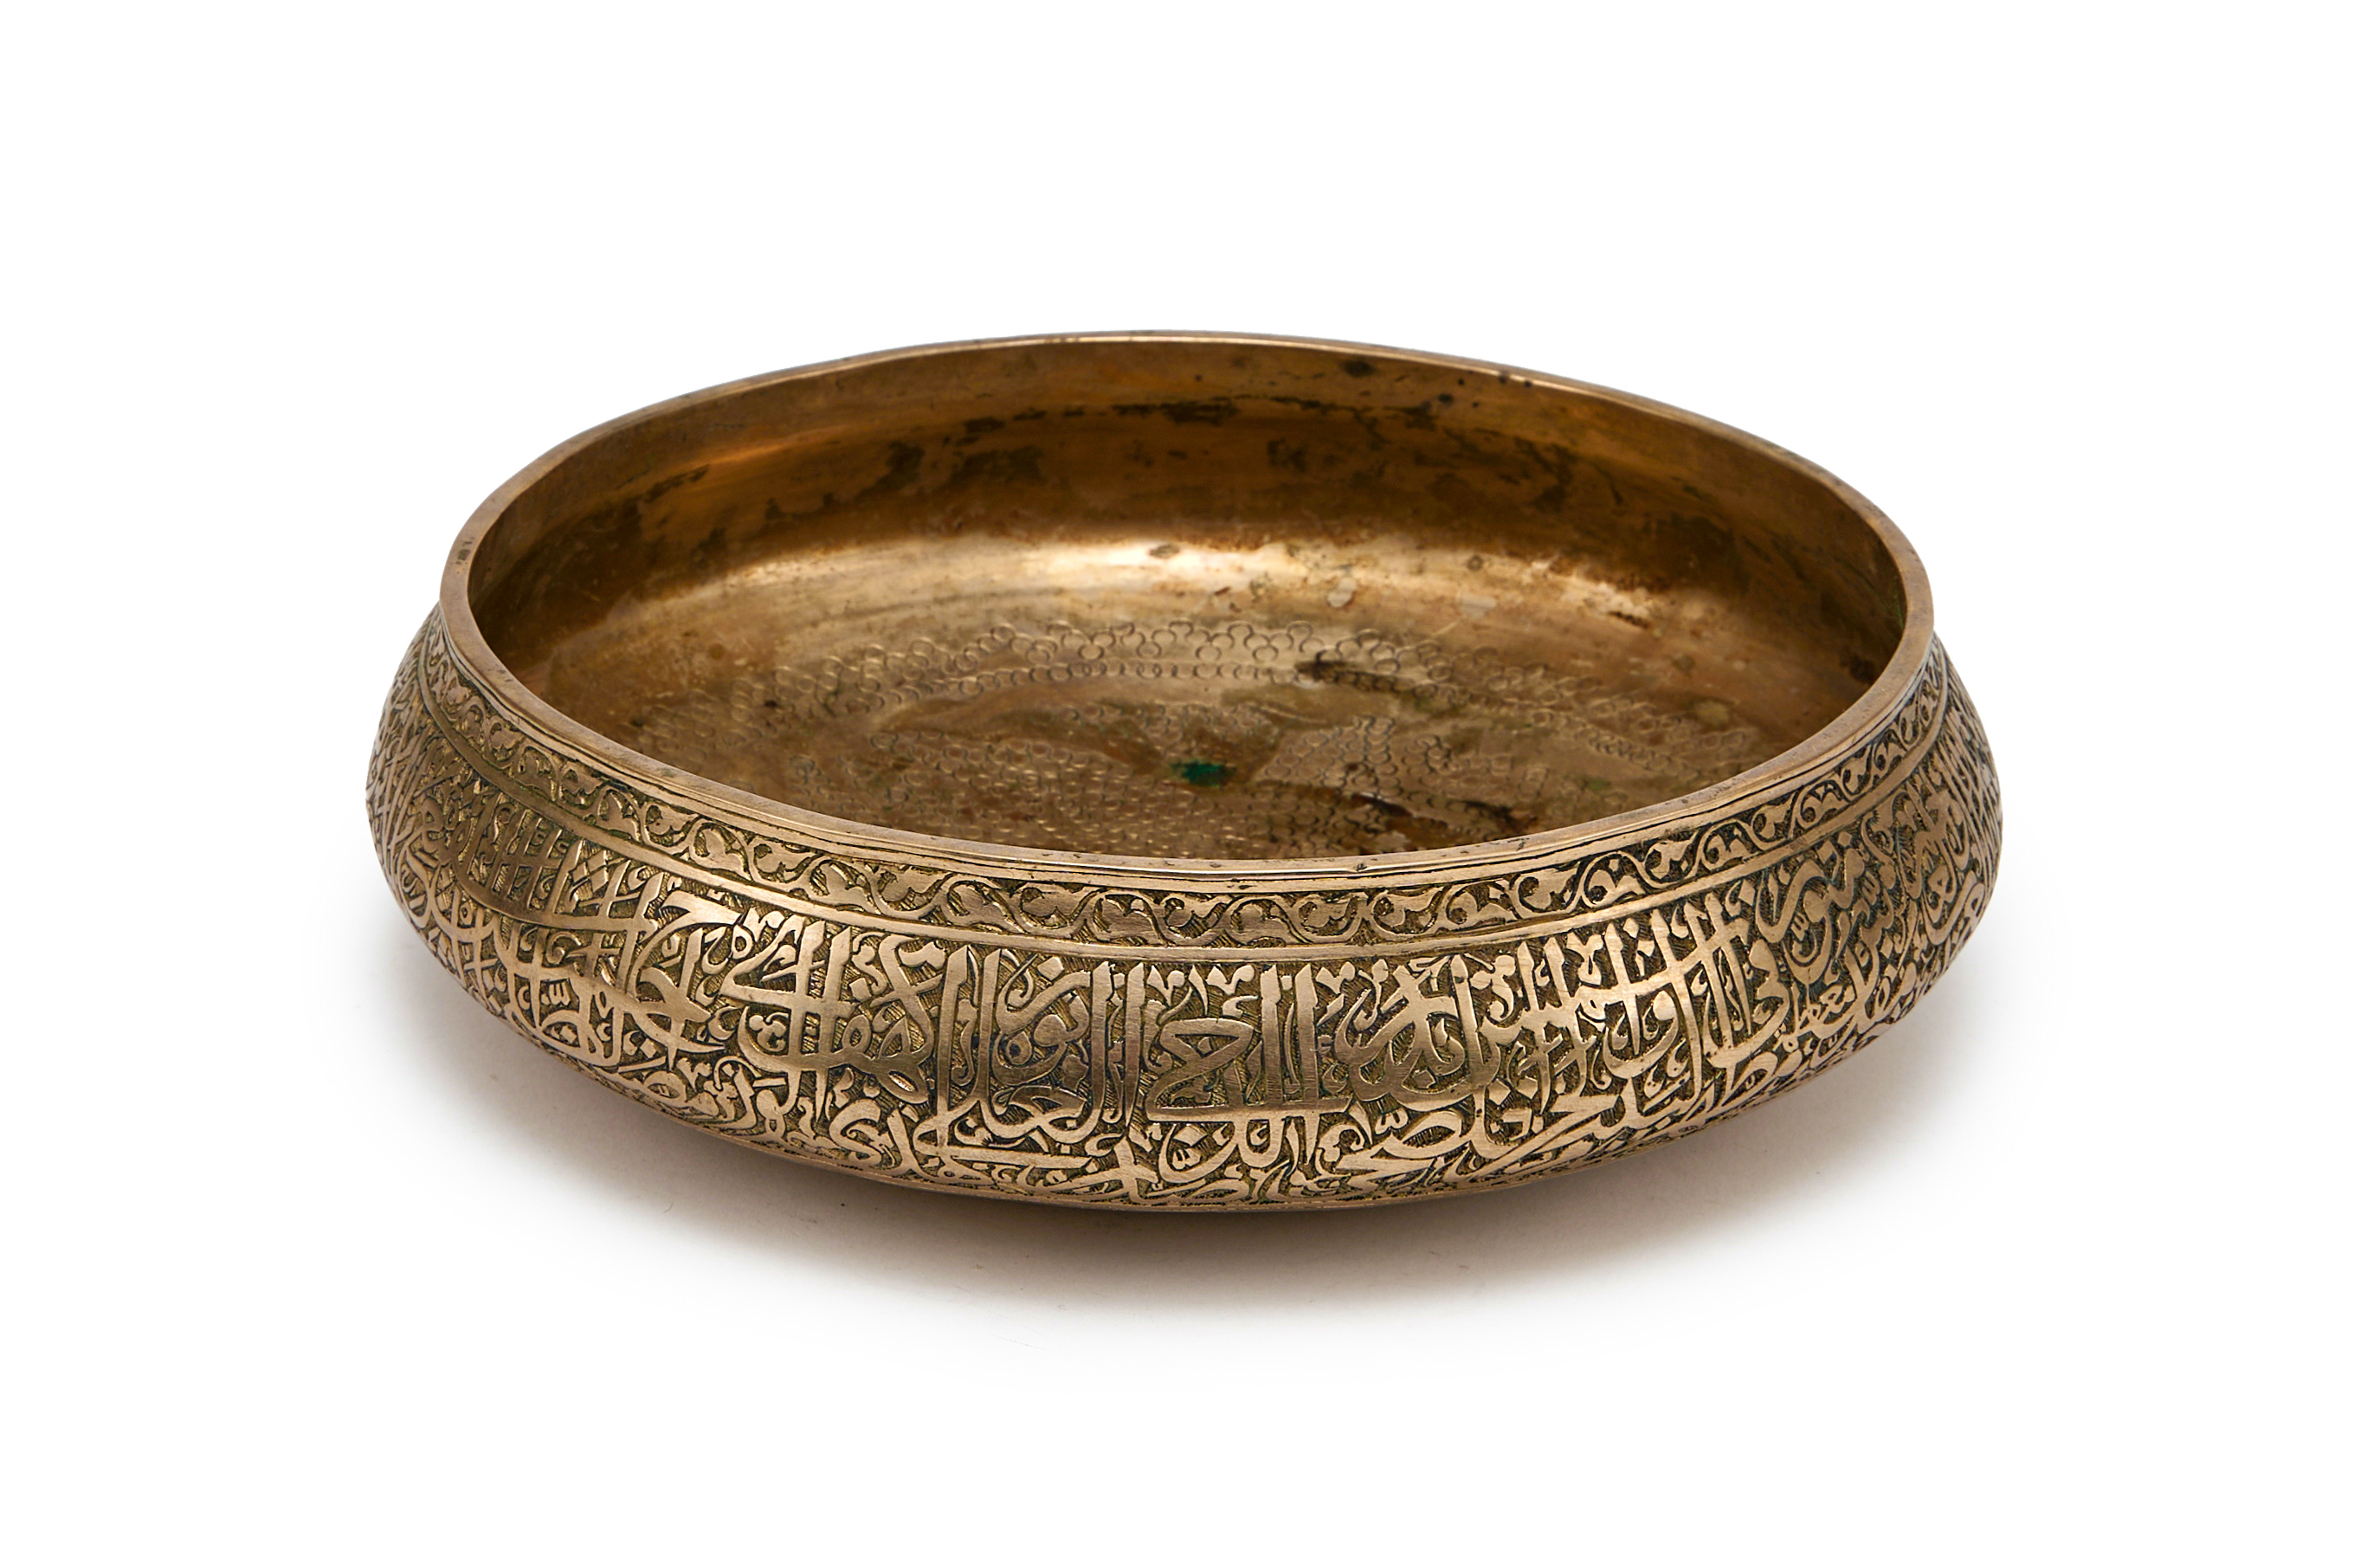 A CALLIGRAPHIC INSCRIBED BASIN, ZAND DYNASTY, 18TH CENTURY, PERSIA - Image 2 of 3